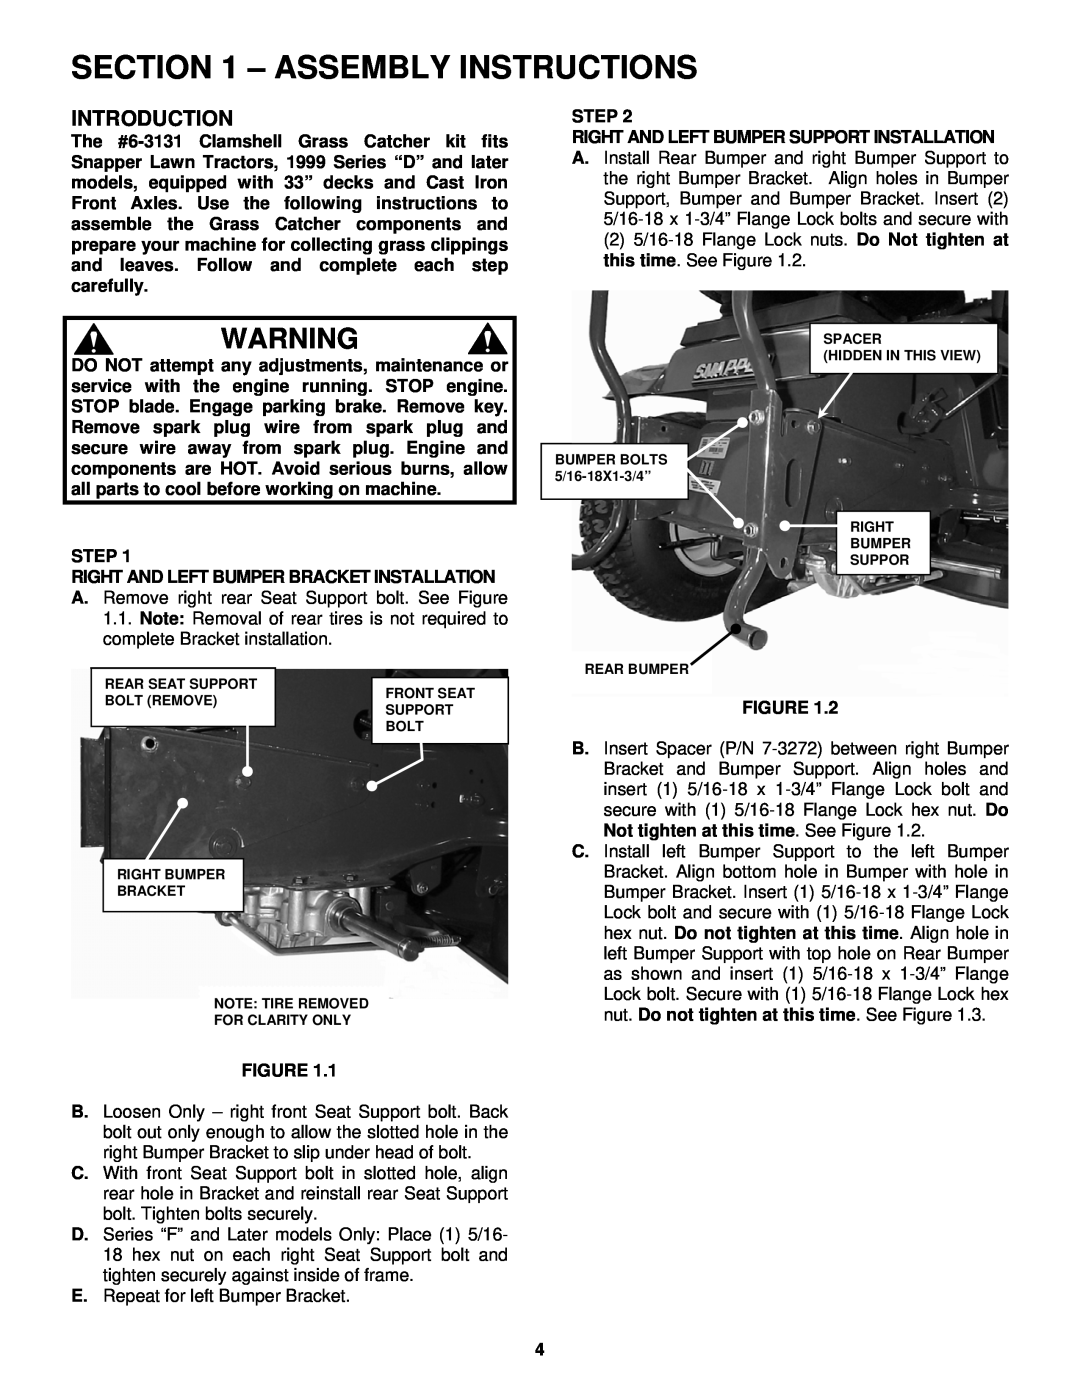 Snapper 6-3131 manual Assembly Instructions, Introduction, Step Right And Left Bumper Bracket Installation 